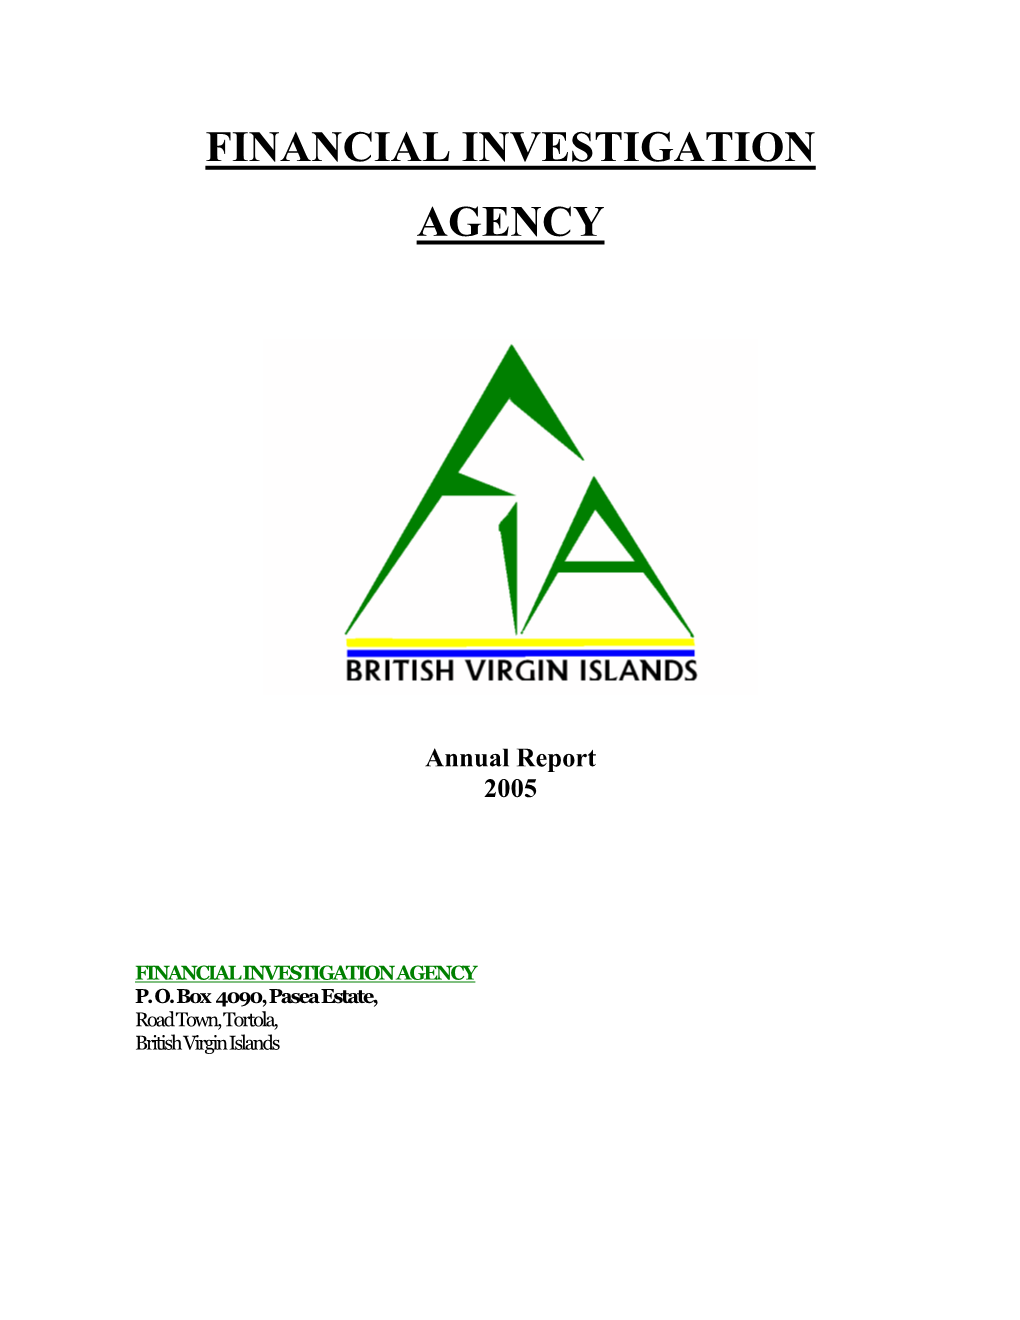 Financial Investigation Agency 2005 Annual Report